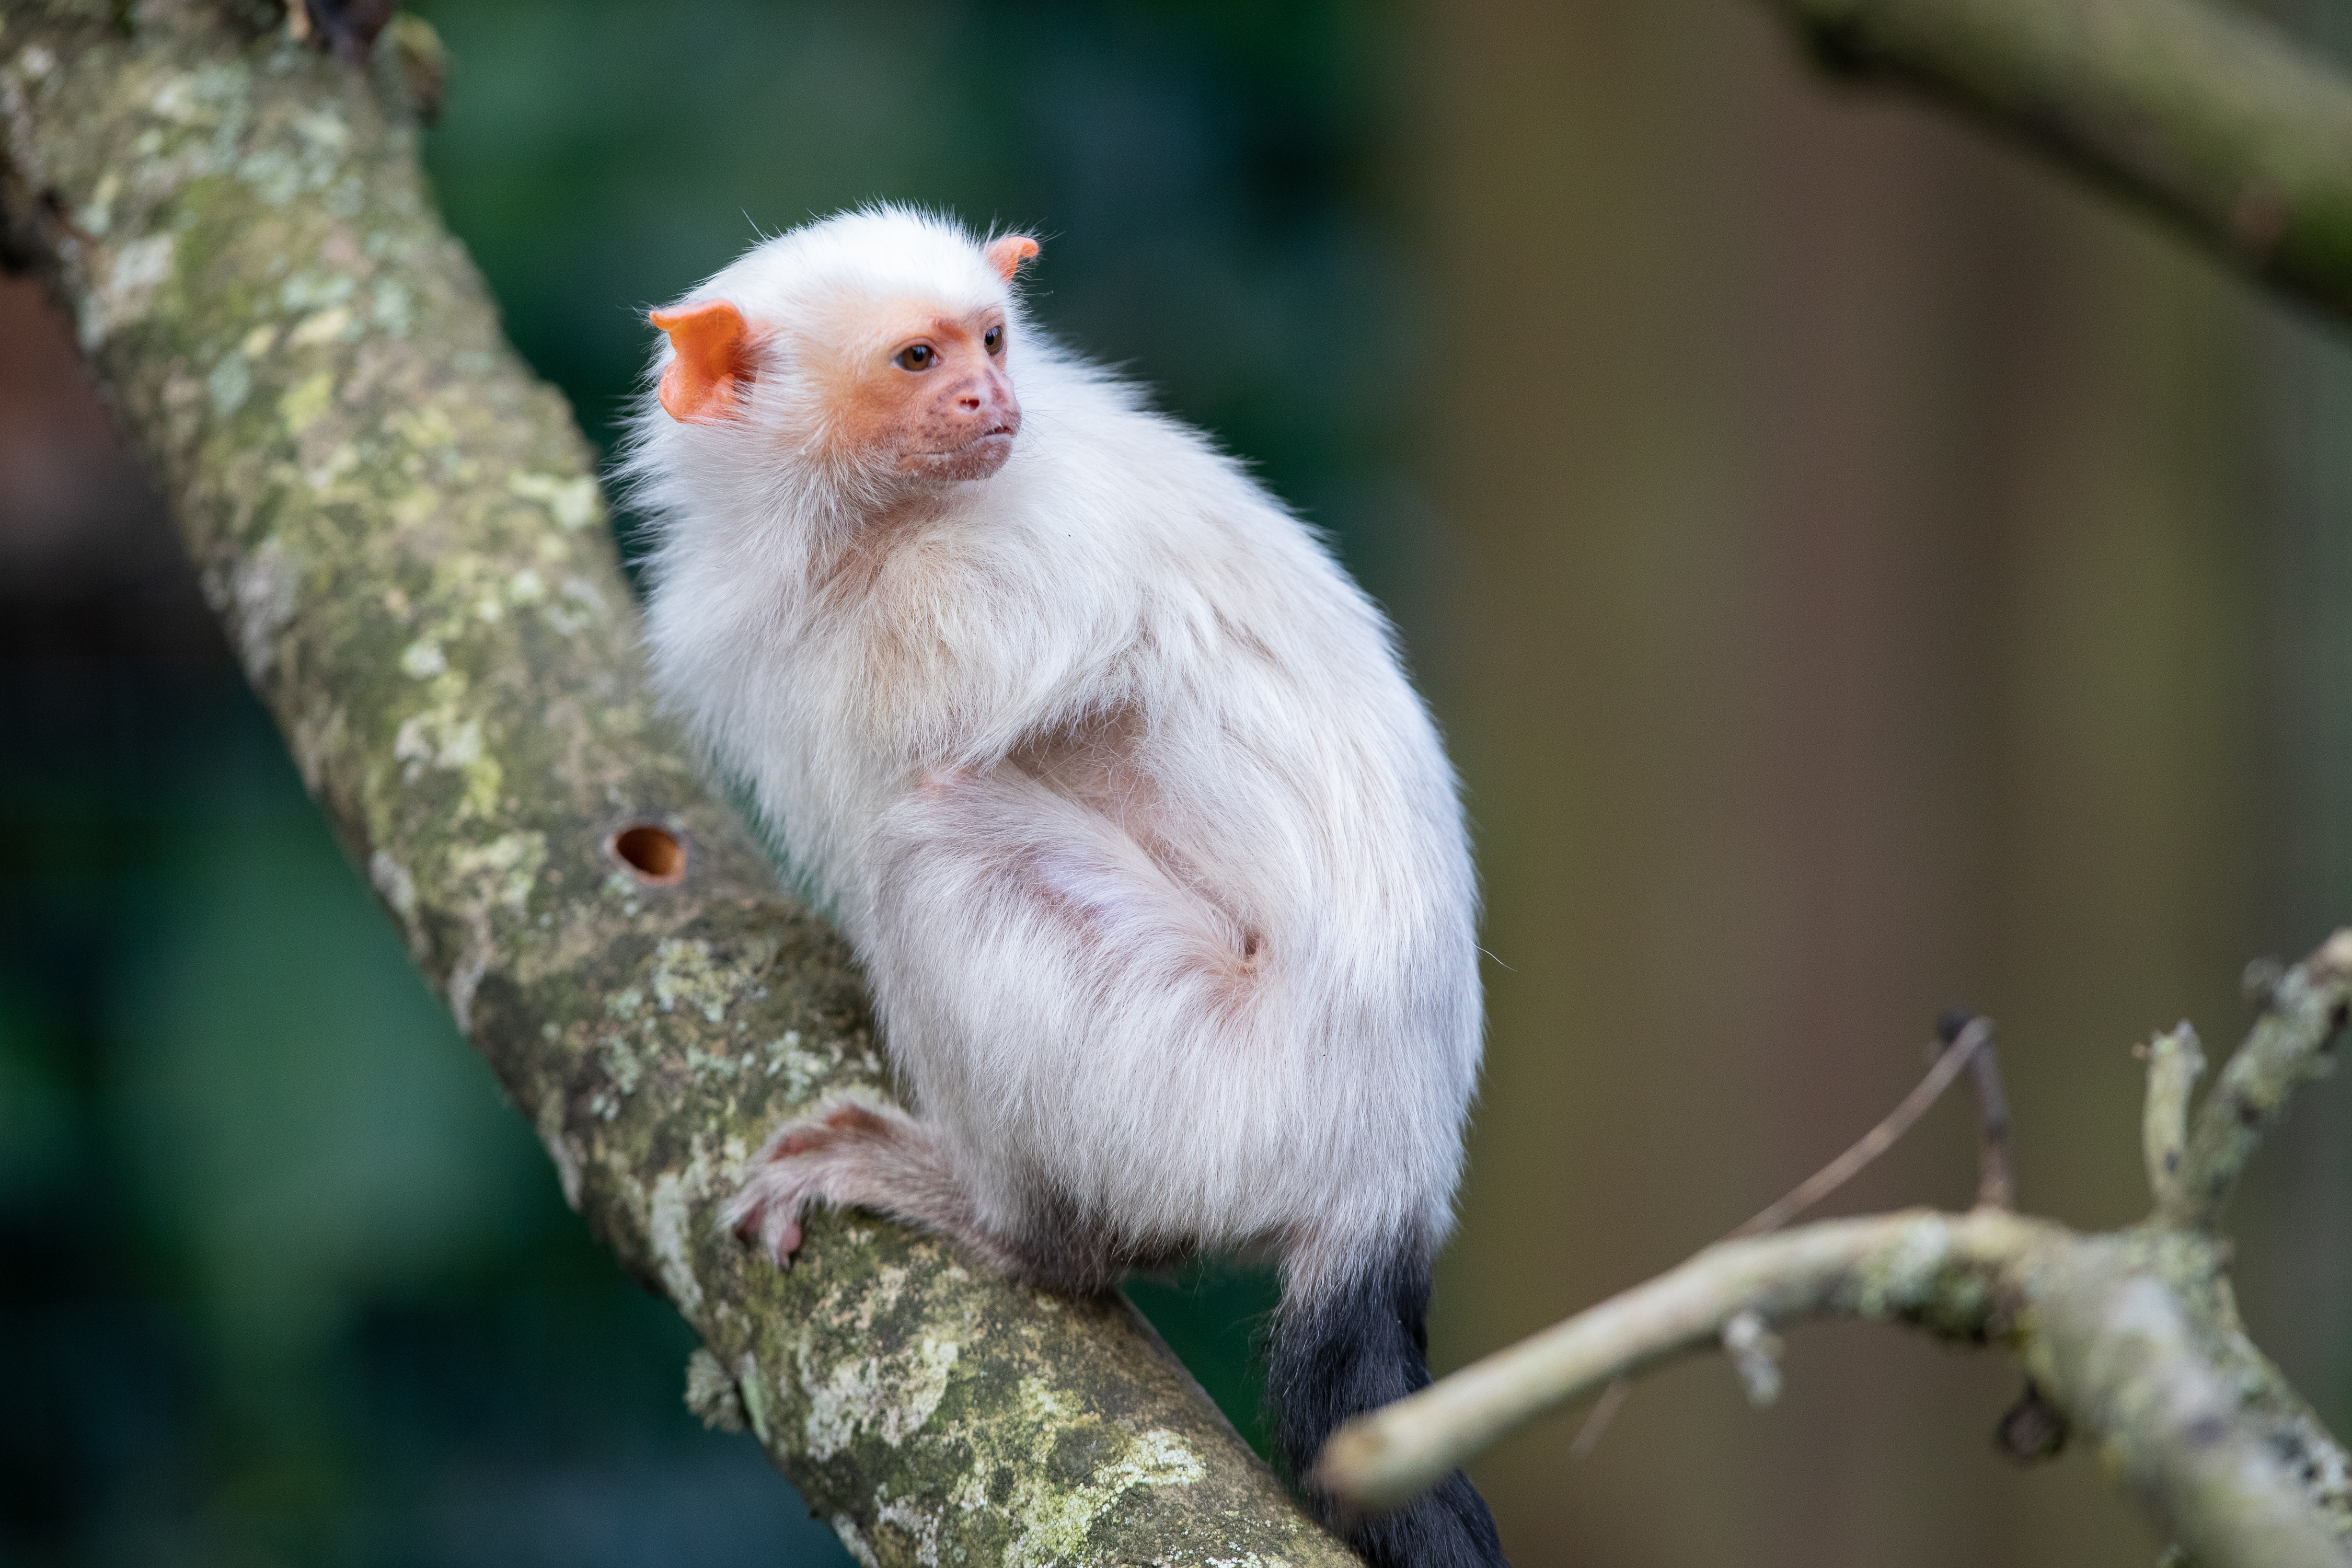 an image of a silvery marmoset in a tree